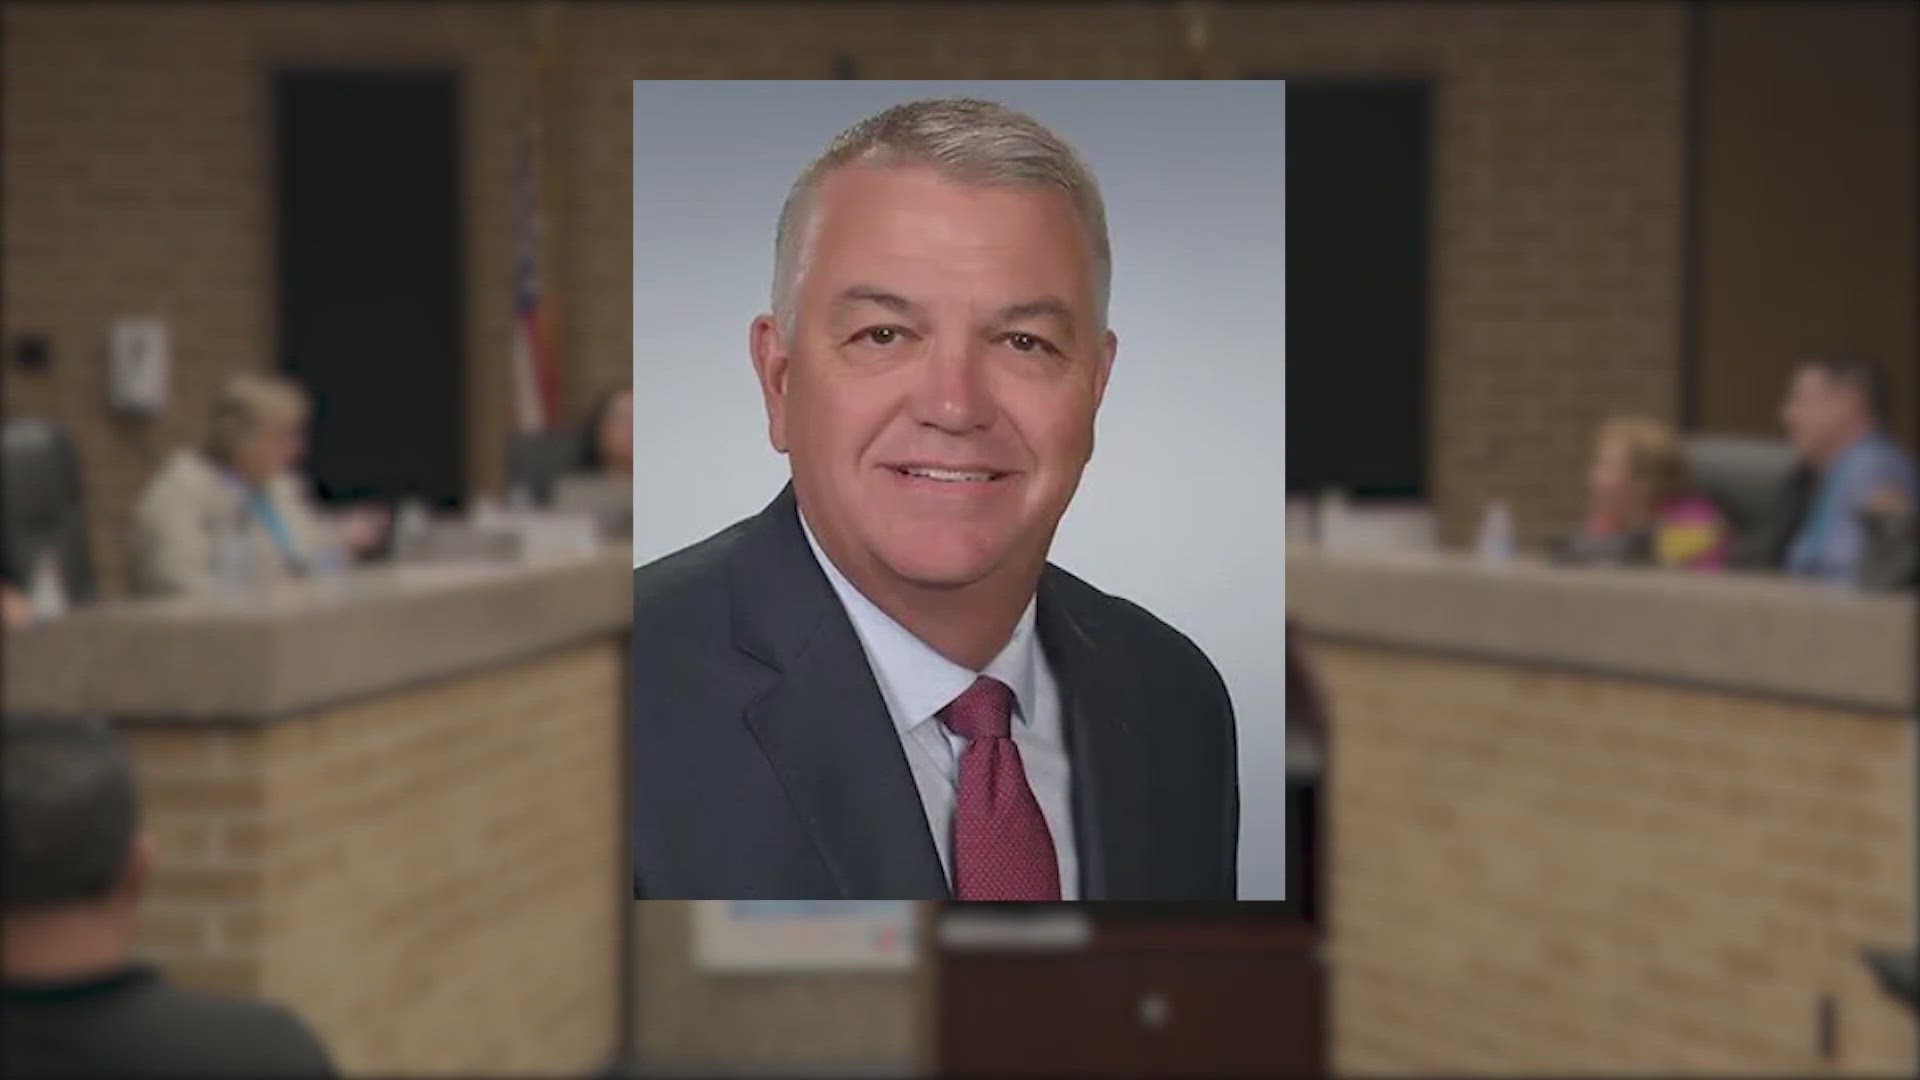 Galveston ISD Superintendent Jerry Gibson is out after coming under fire for sexist comments he made at a district event.